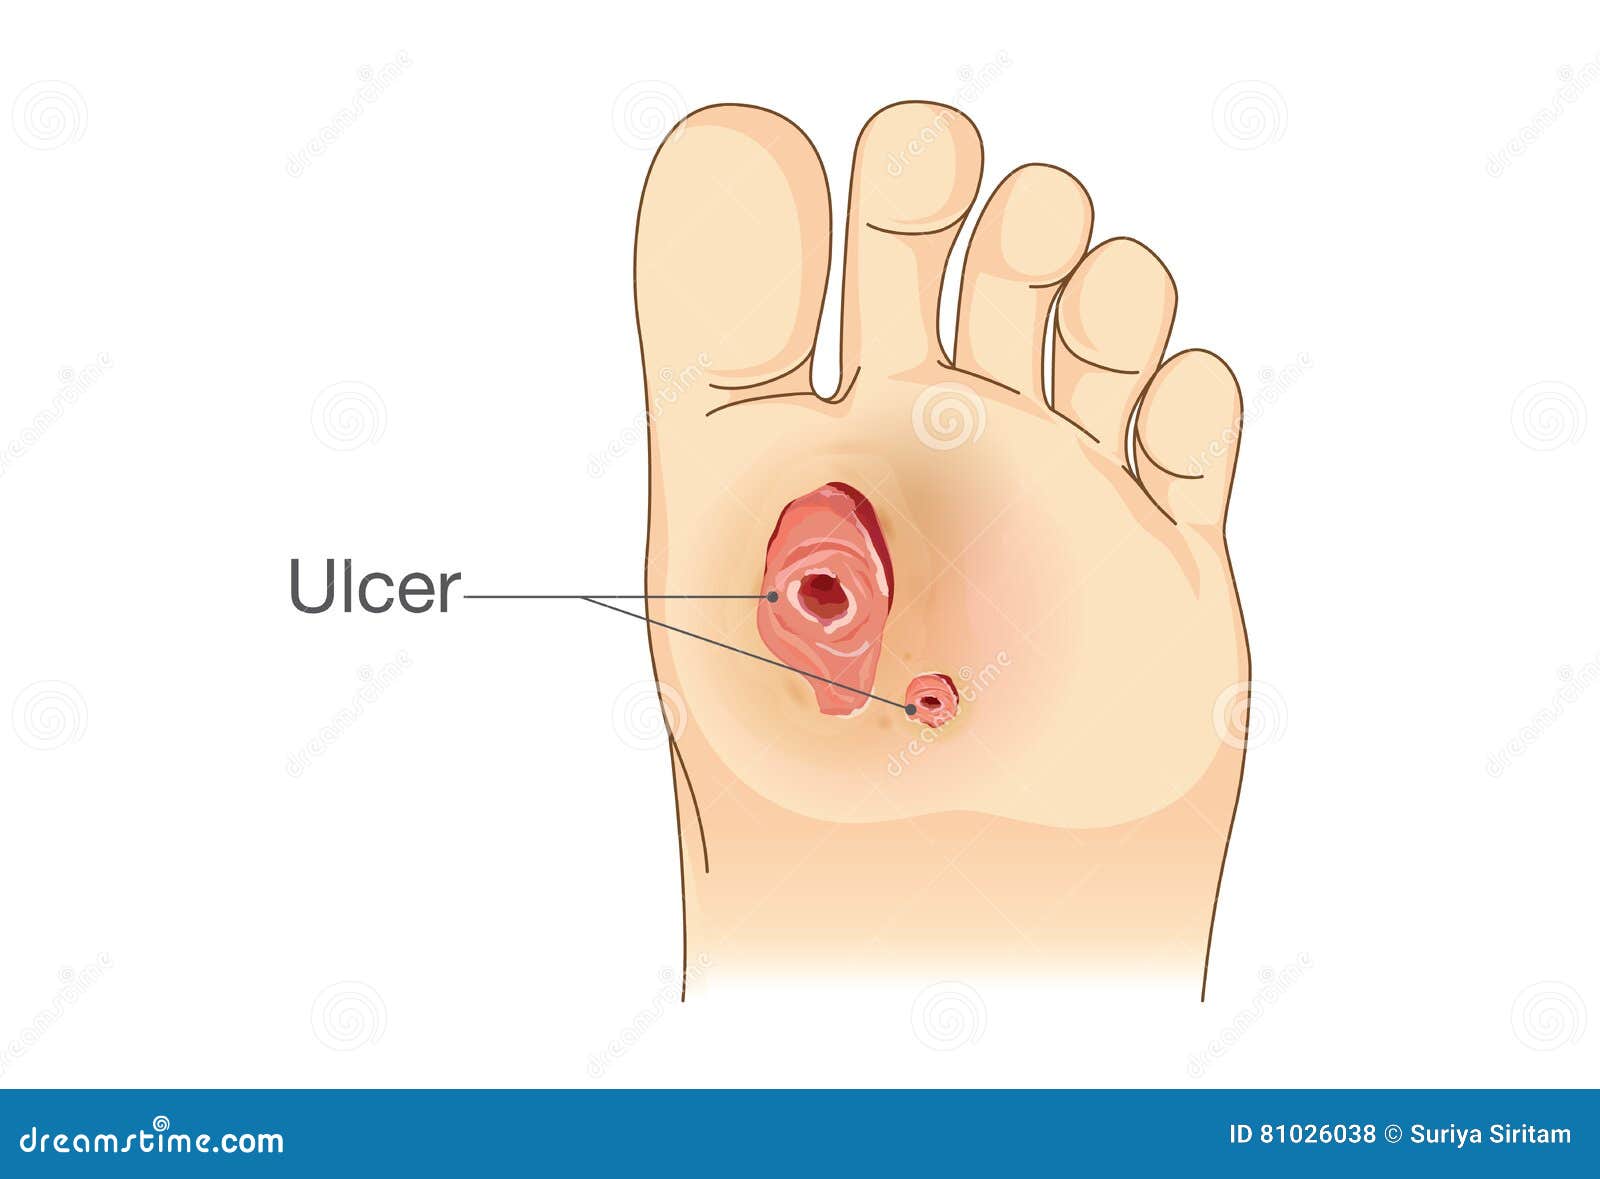 diabetic foot pain and ulcers.